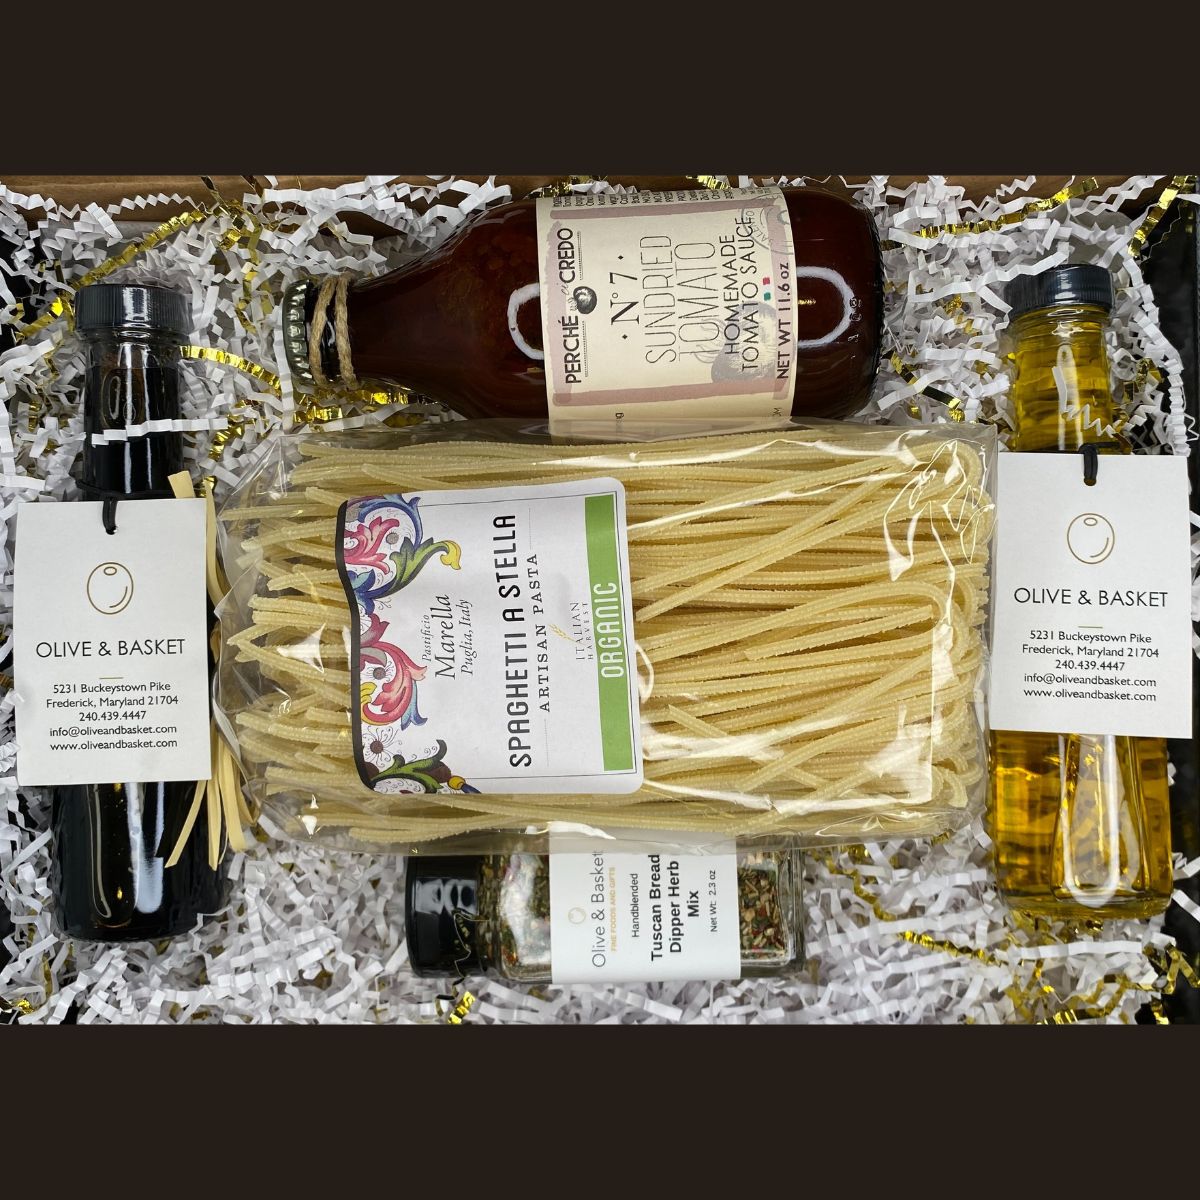 Spaghetti Dinner Night Gift Box- a perfect gift for one person or an entire family!